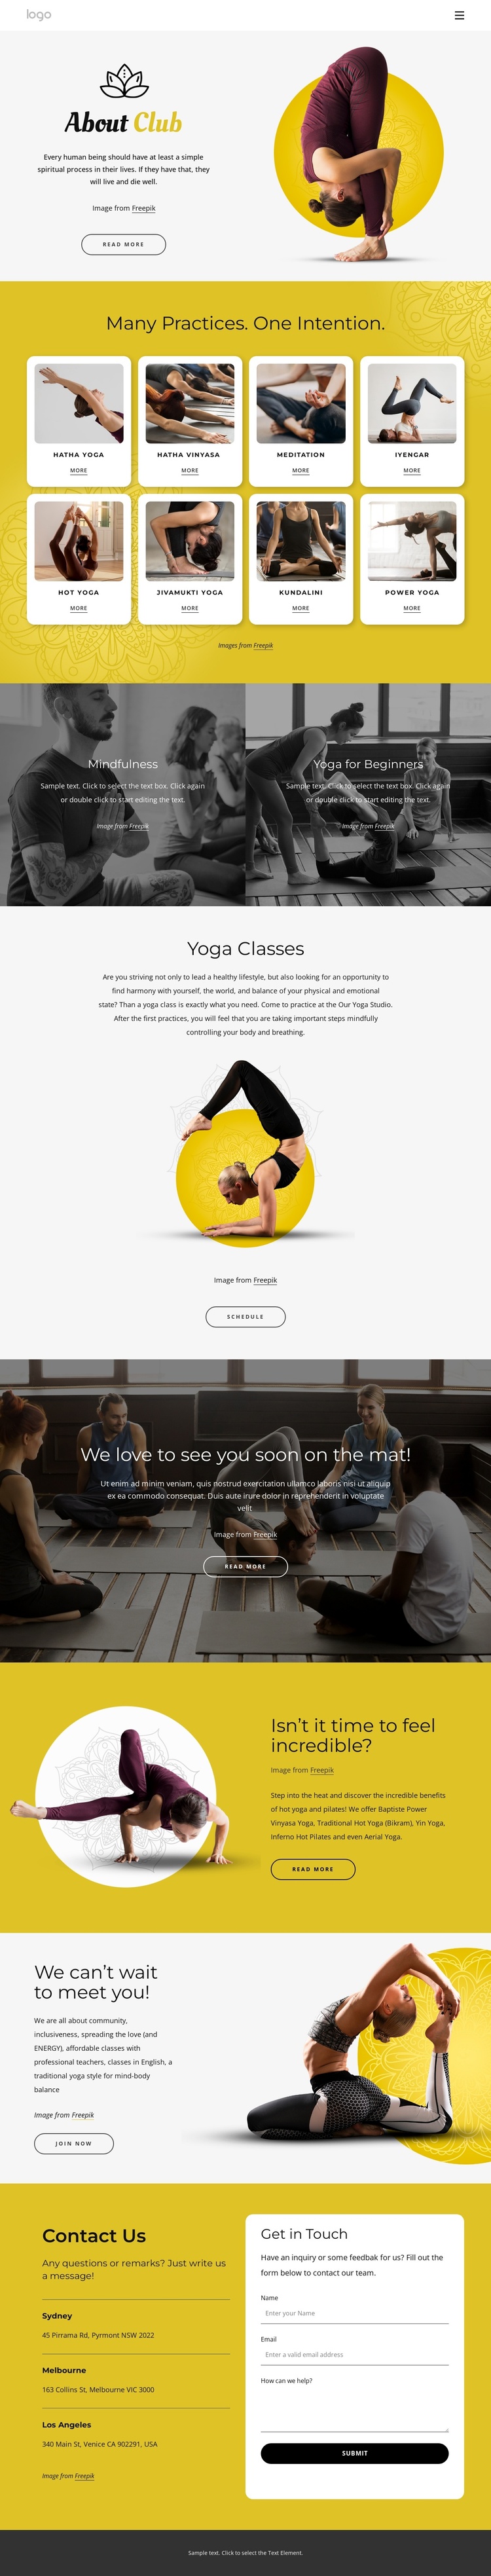 Physical, ethical and spiritual practice Joomla Template